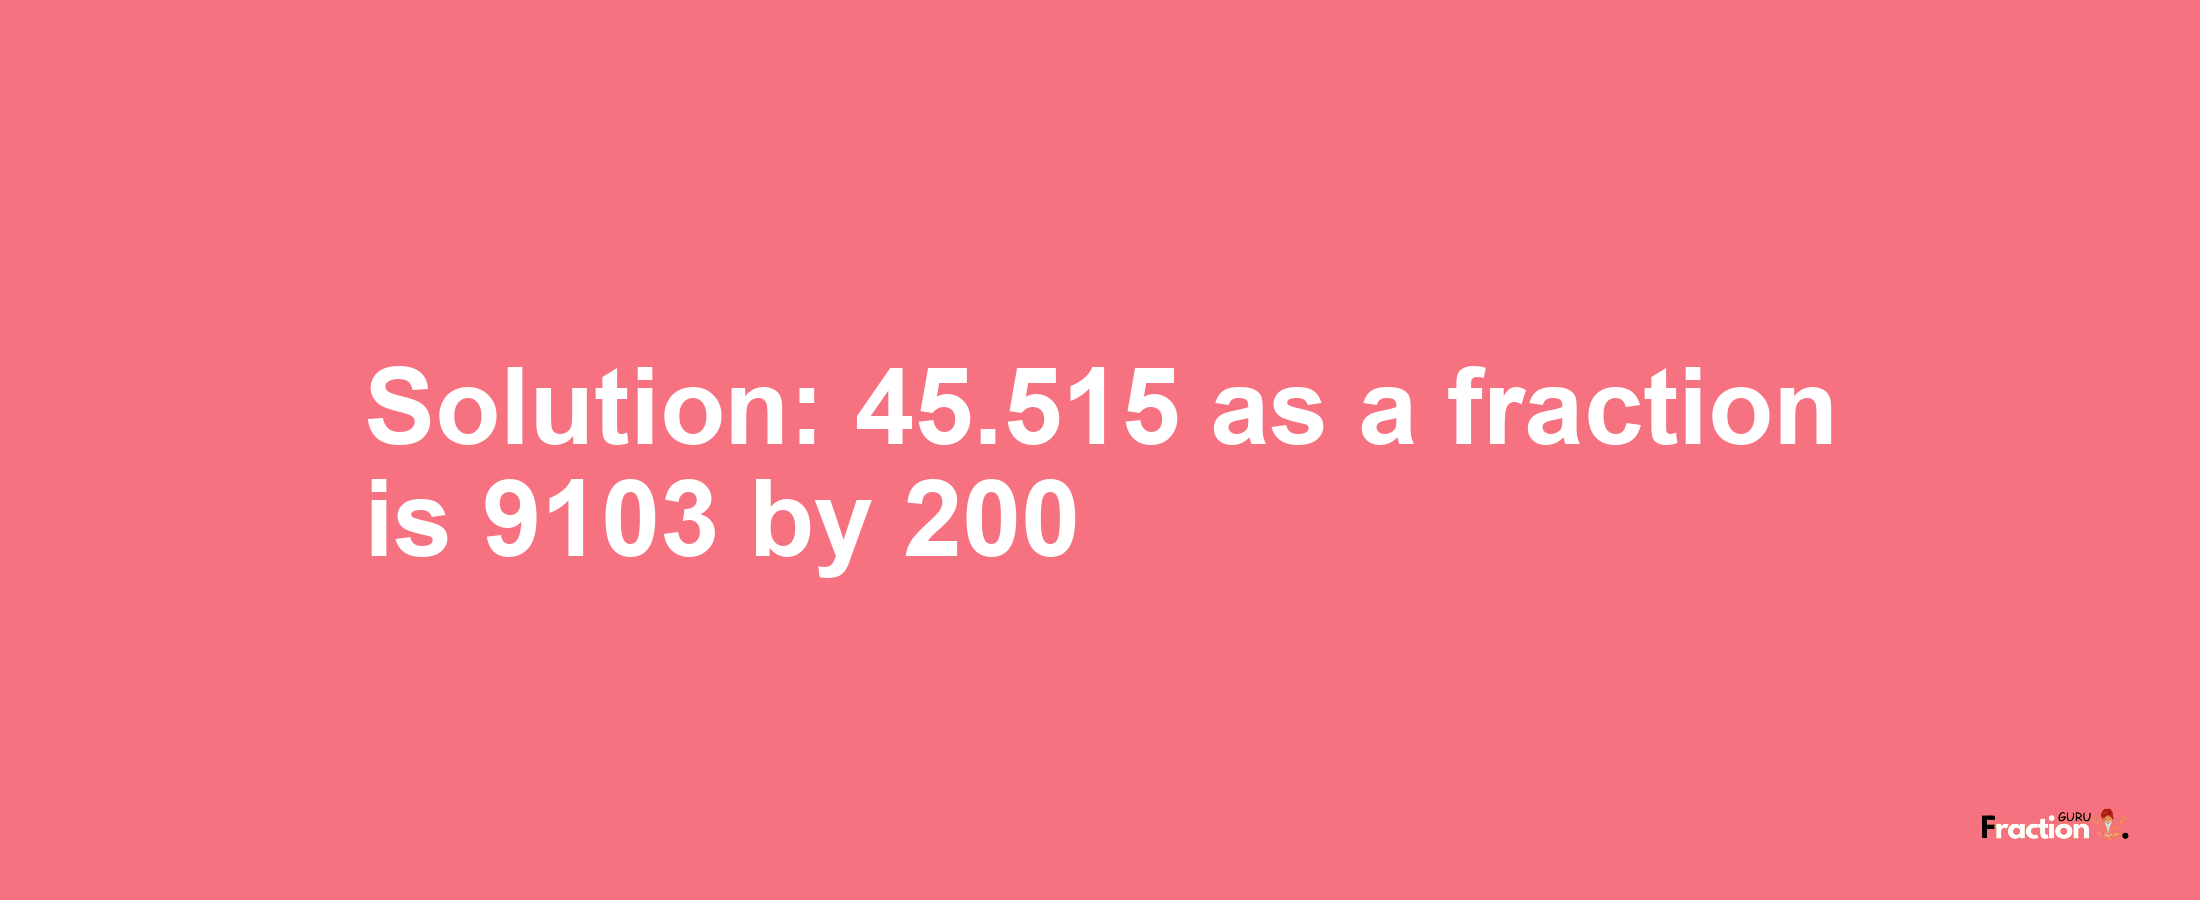 Solution:45.515 as a fraction is 9103/200